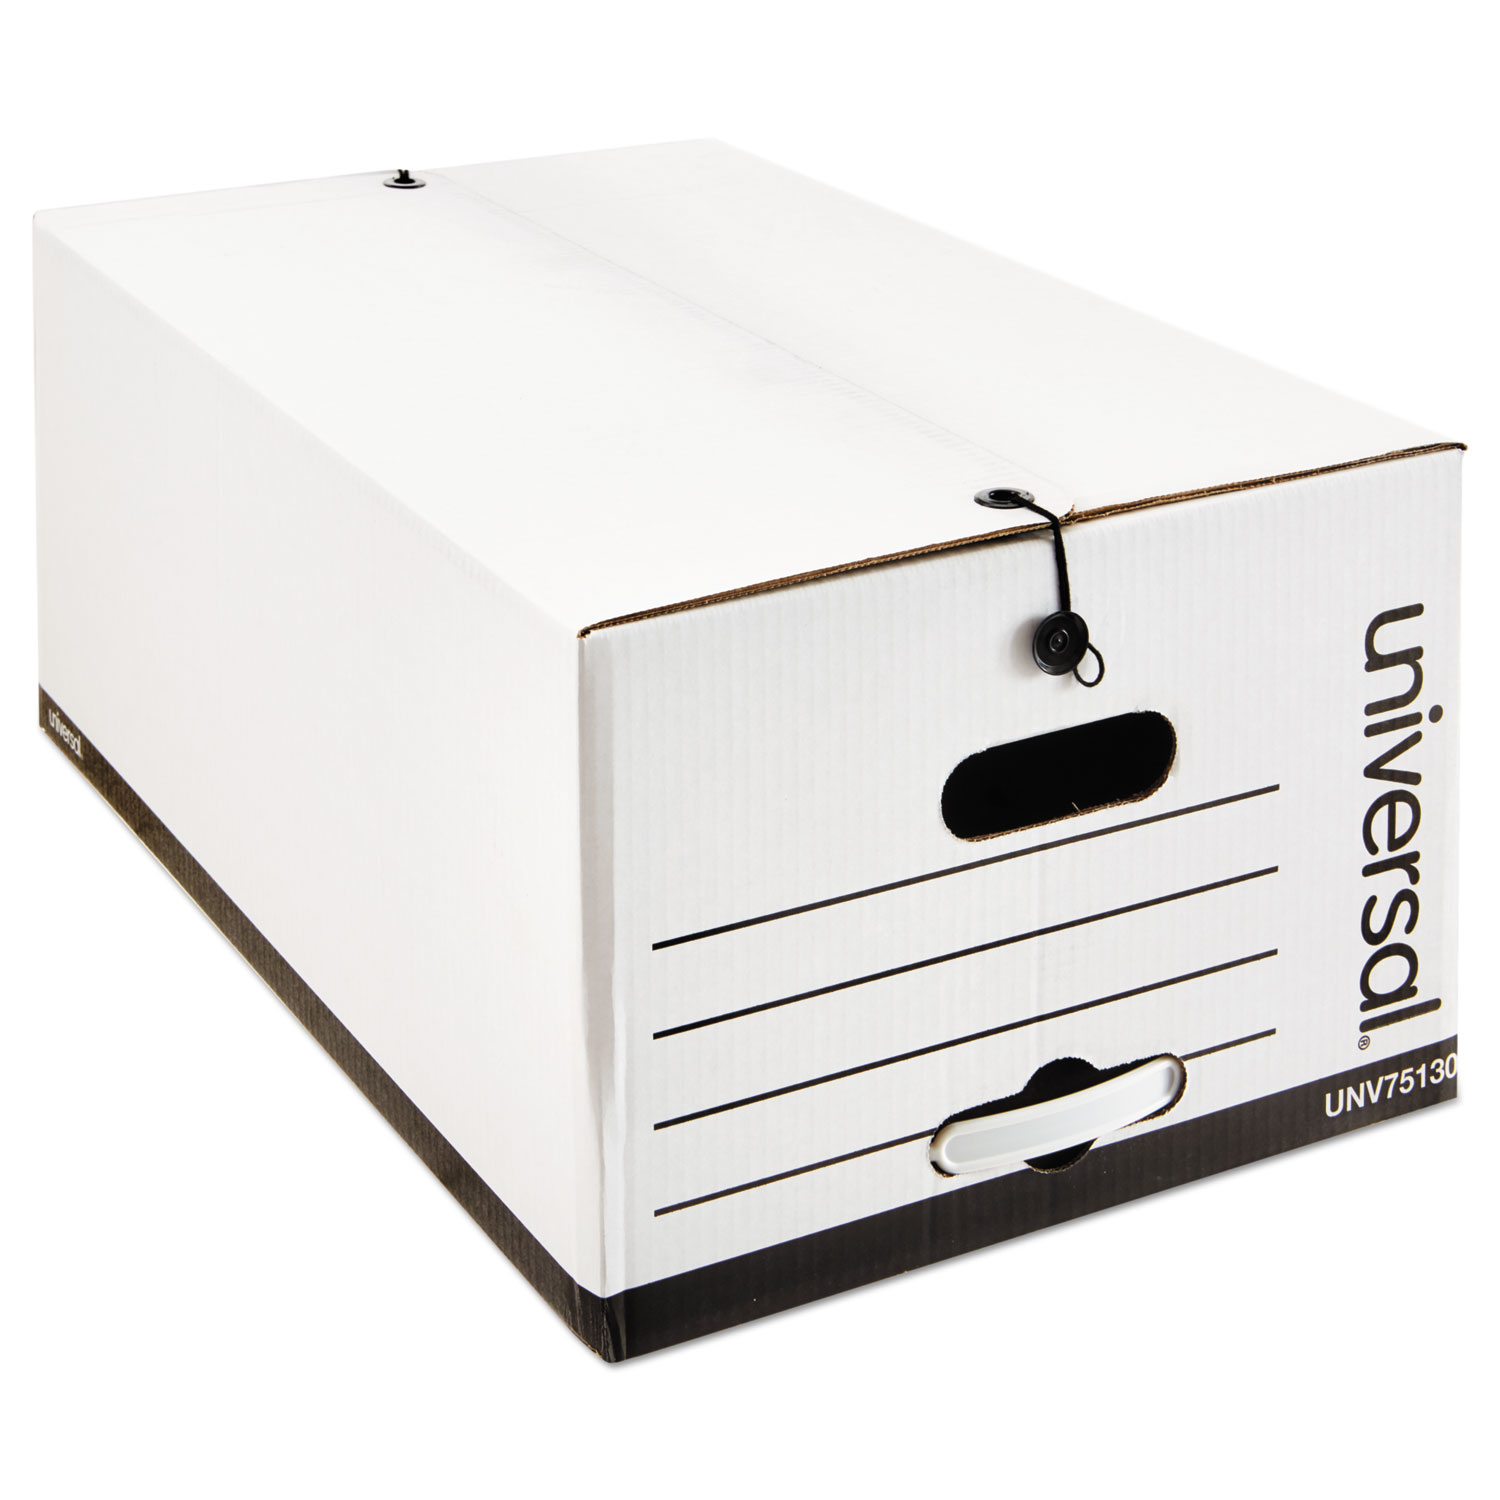  Universal 7513002 Economical Easy Assembly Storage Files, Legal Files, White, 12/Carton (UNV75130) 